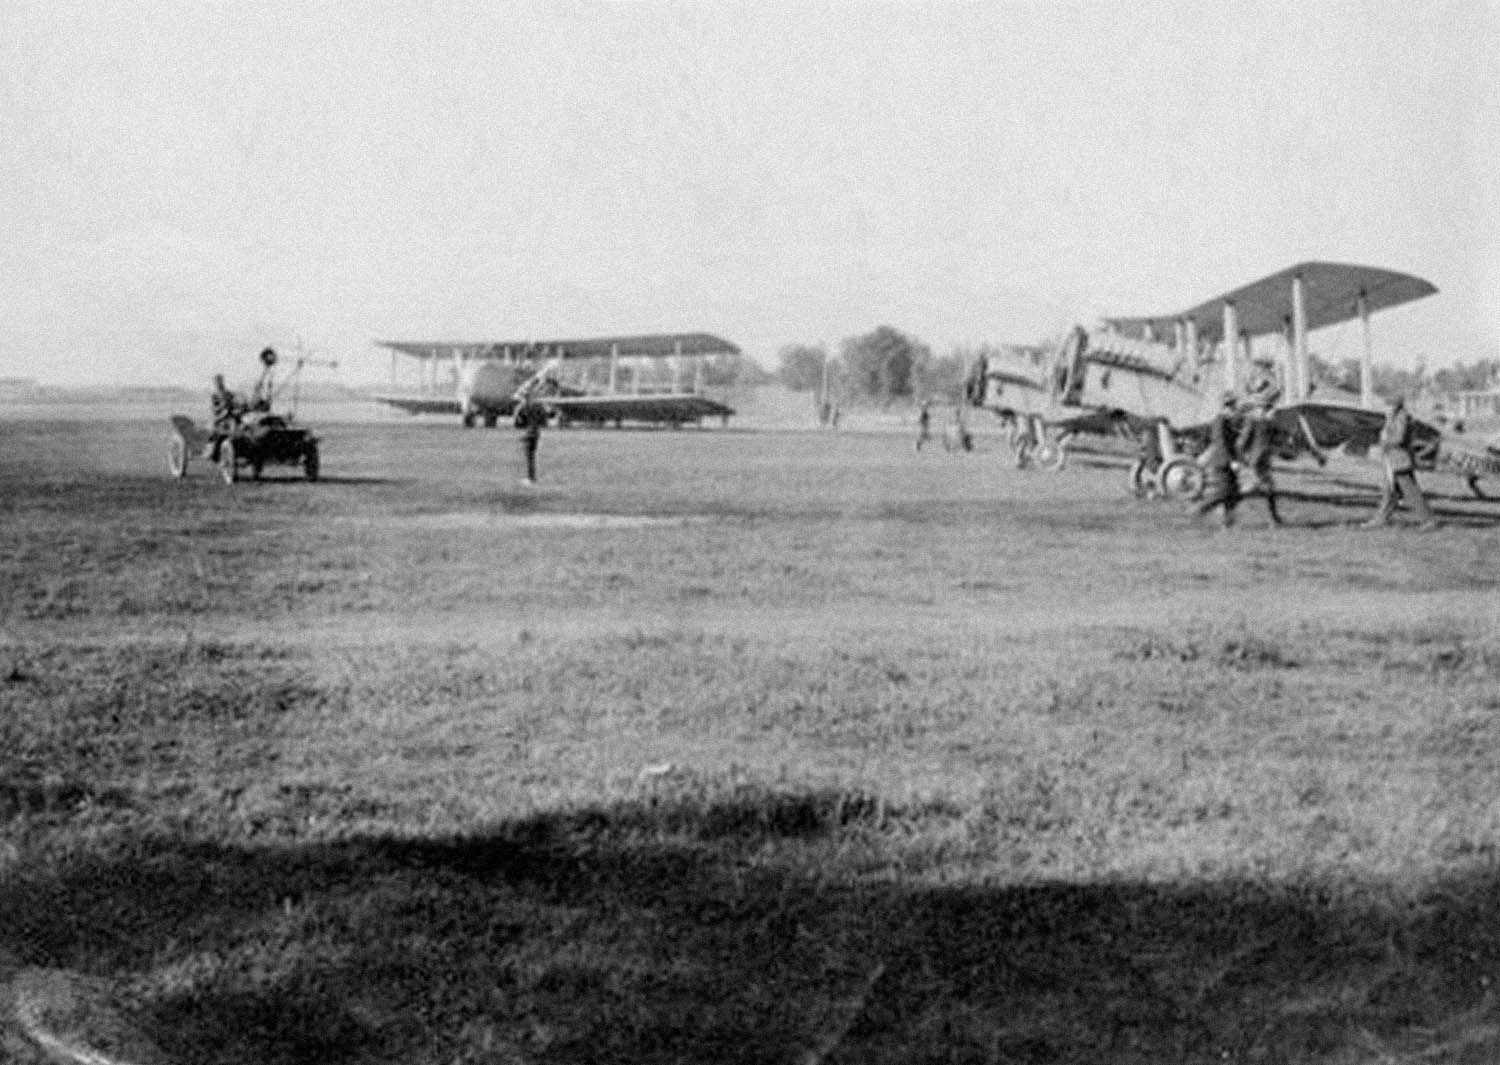 The first evacuation flight lands at Peshawar, then part of a greater, British-ruled India (now part of Pakistan). One of No. 70 Squadron's Vickers Victoria transports rests near two de Havilland DH-9As. (IWM HU 14496)